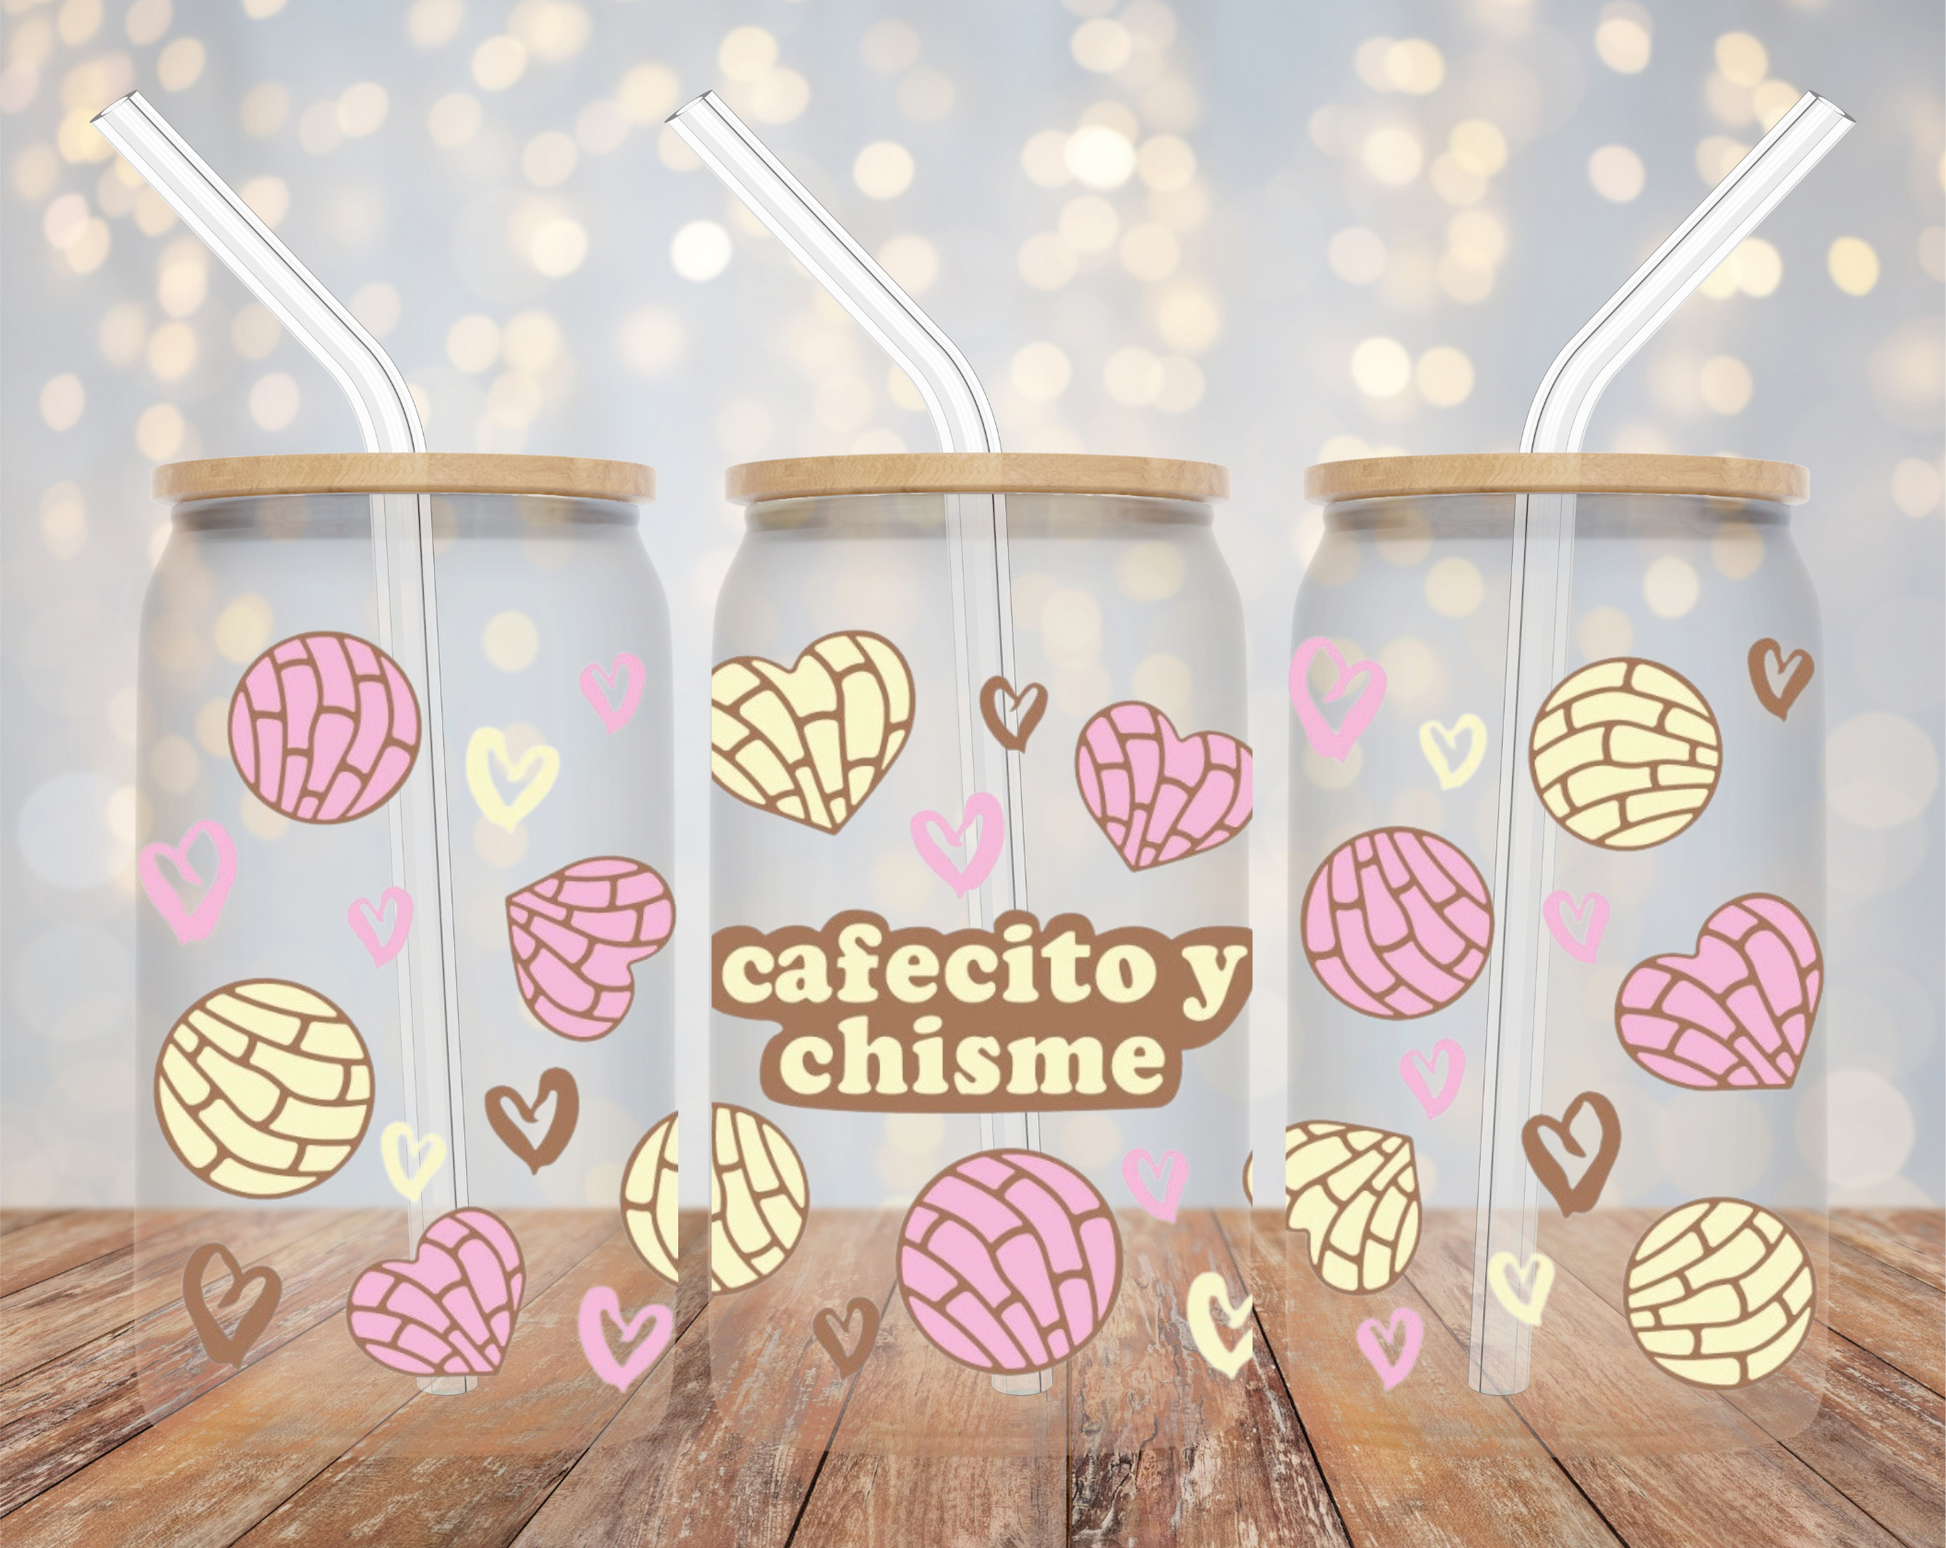 Cafecito y Chisme – Trendy Styles